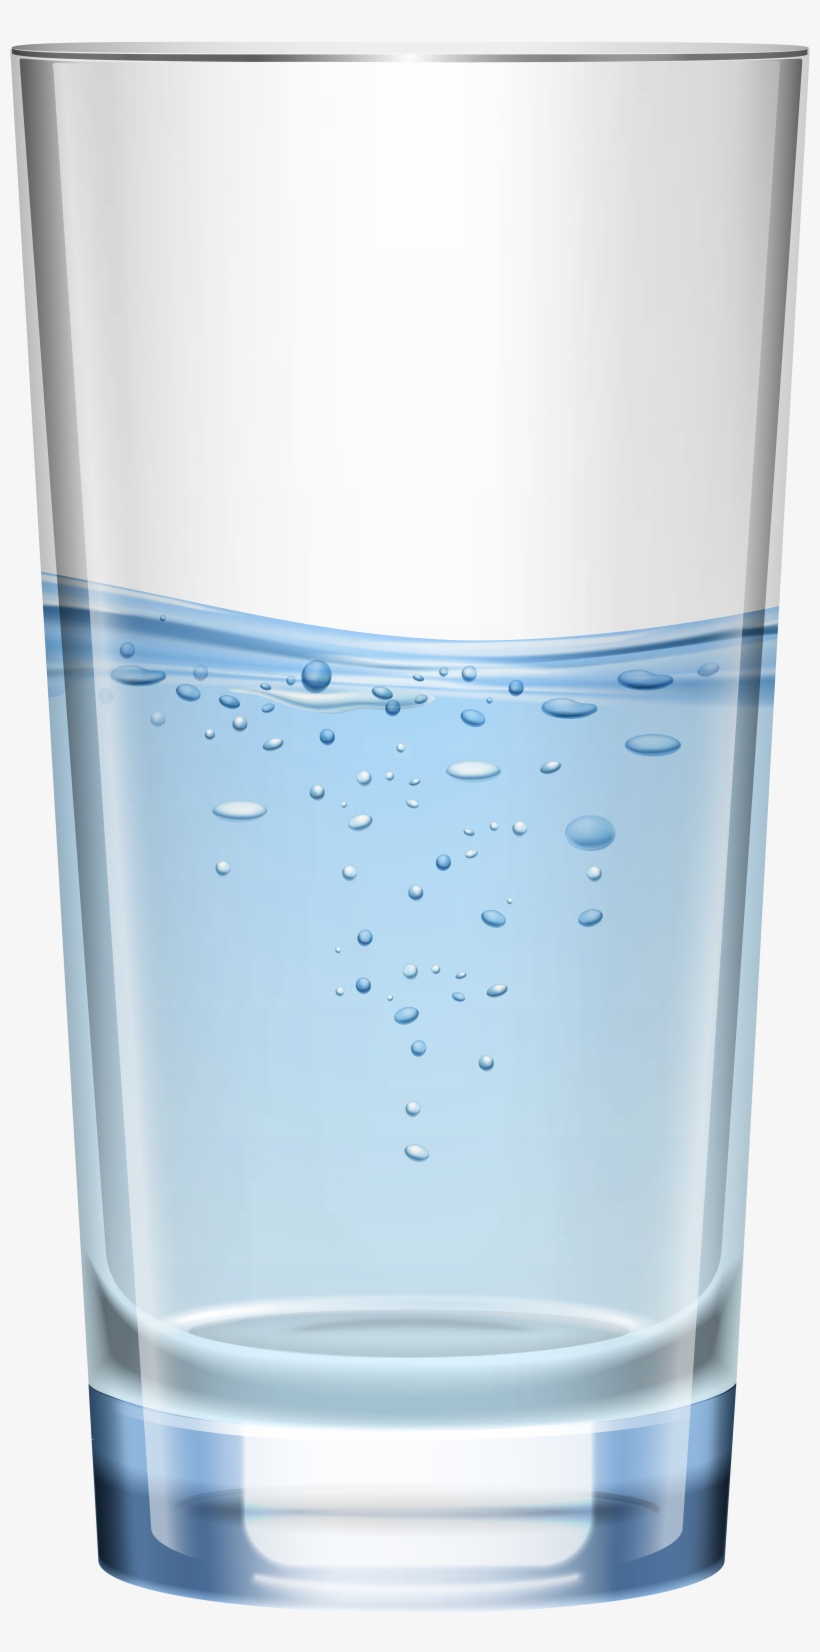 https://clipart-library.com/new_gallery/86970_glass-of-water-png.png